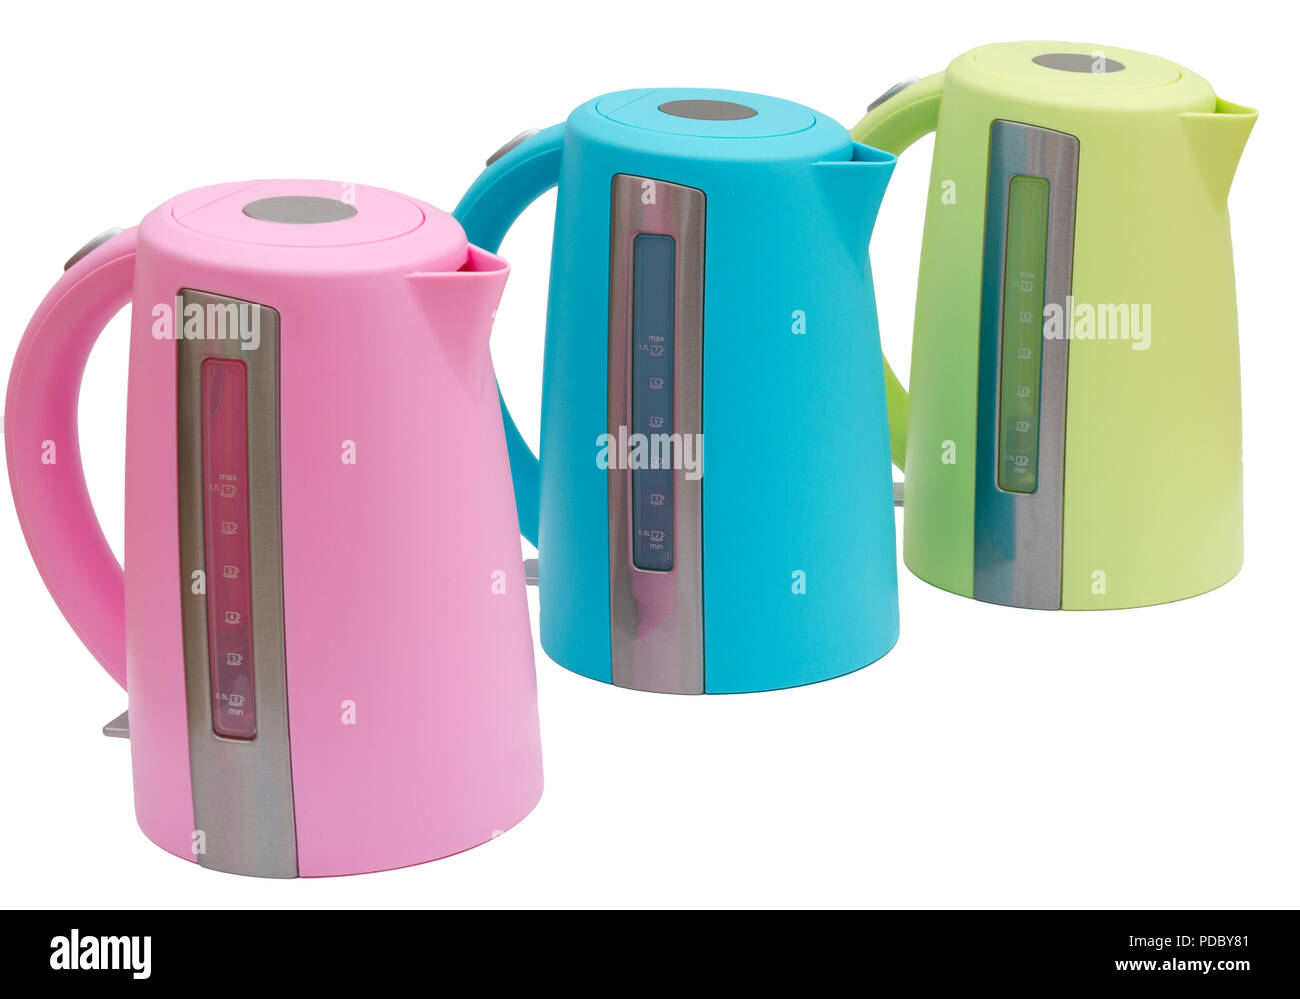 Bright Colorful Water heaters electric Tea kettles isolated on white background Stock Photo